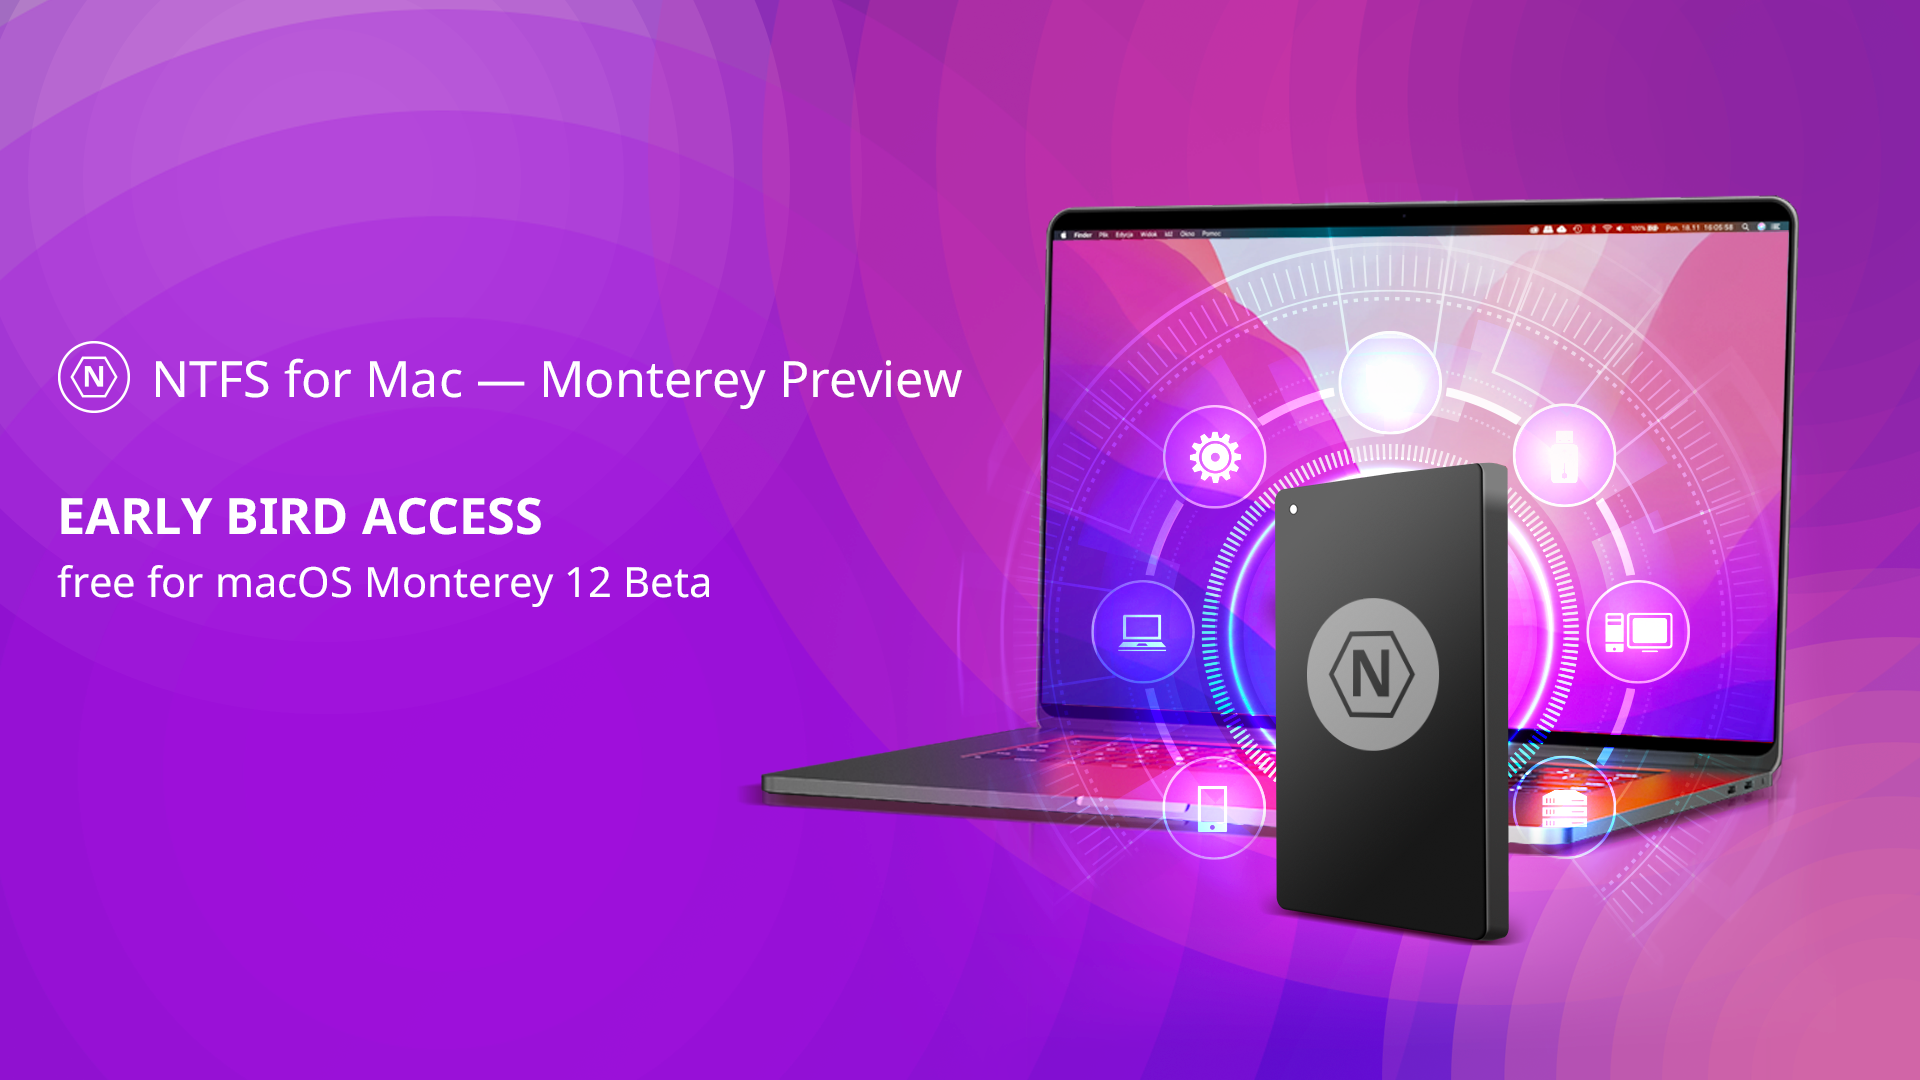 Monterey Preview: FREE EARLY BIRD access to NTFS for Mac with new macOS 12.0 support!